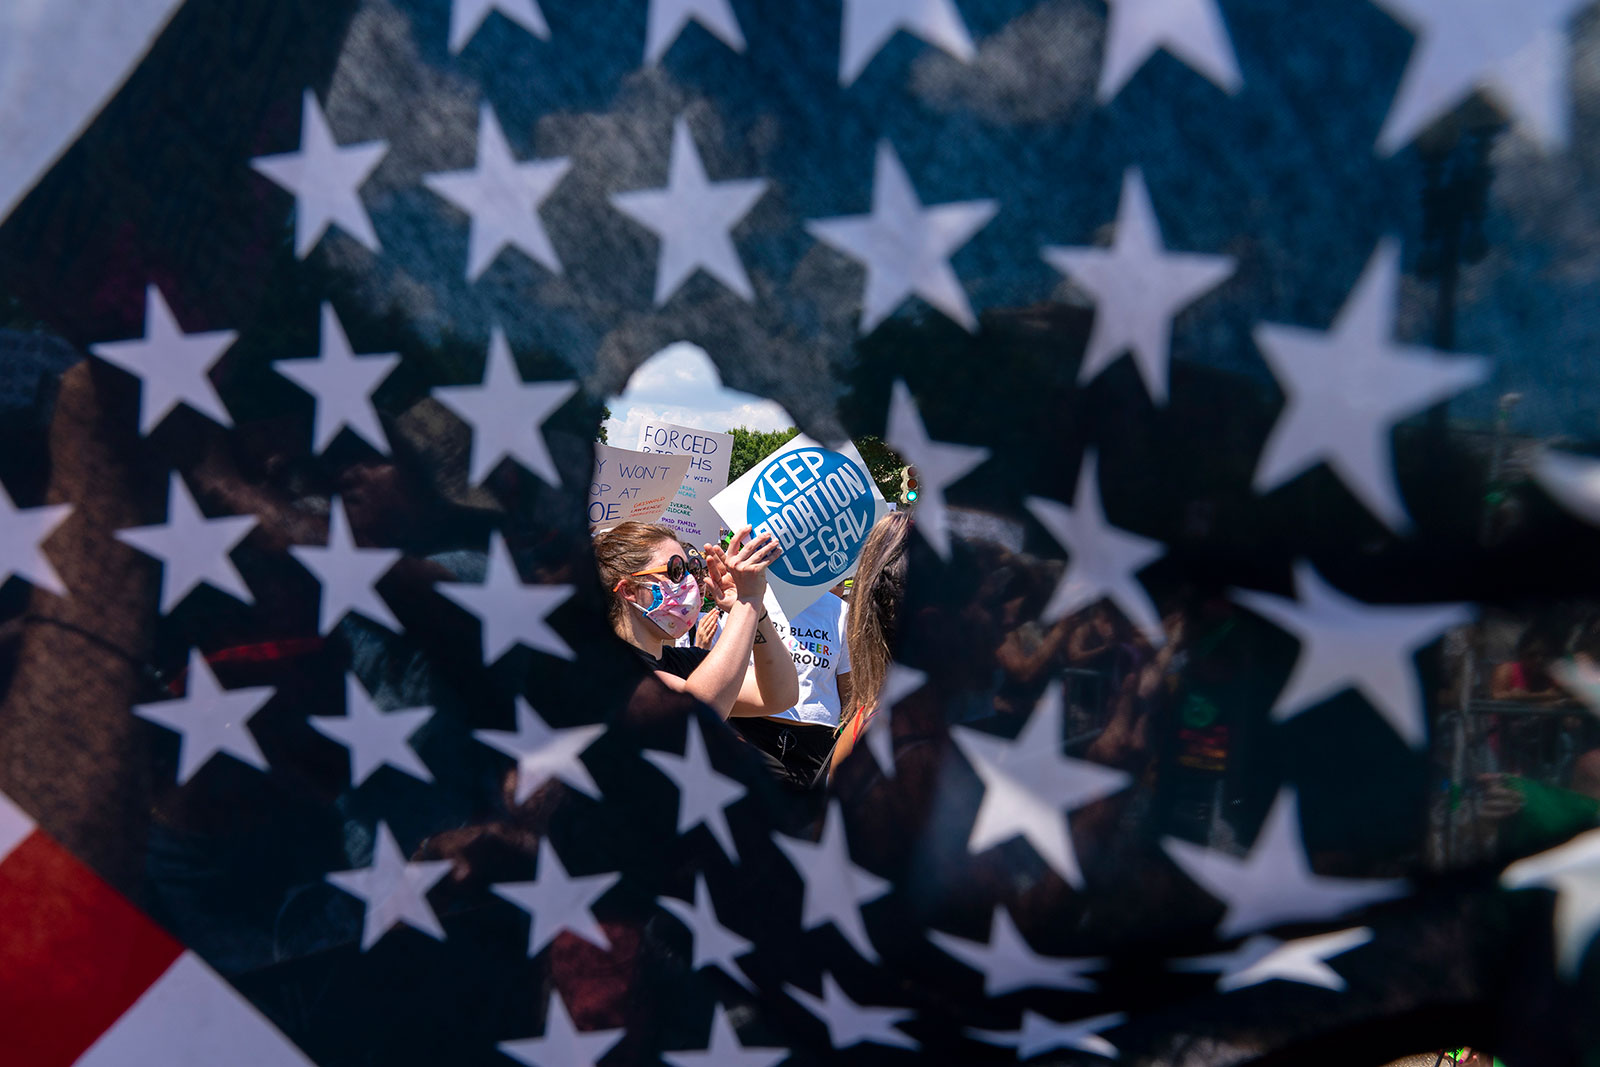 Abortion rights activists are seen through a hole in an American flag as they protest outside the Supreme Court in Washington, DC on Saturday, June 25.